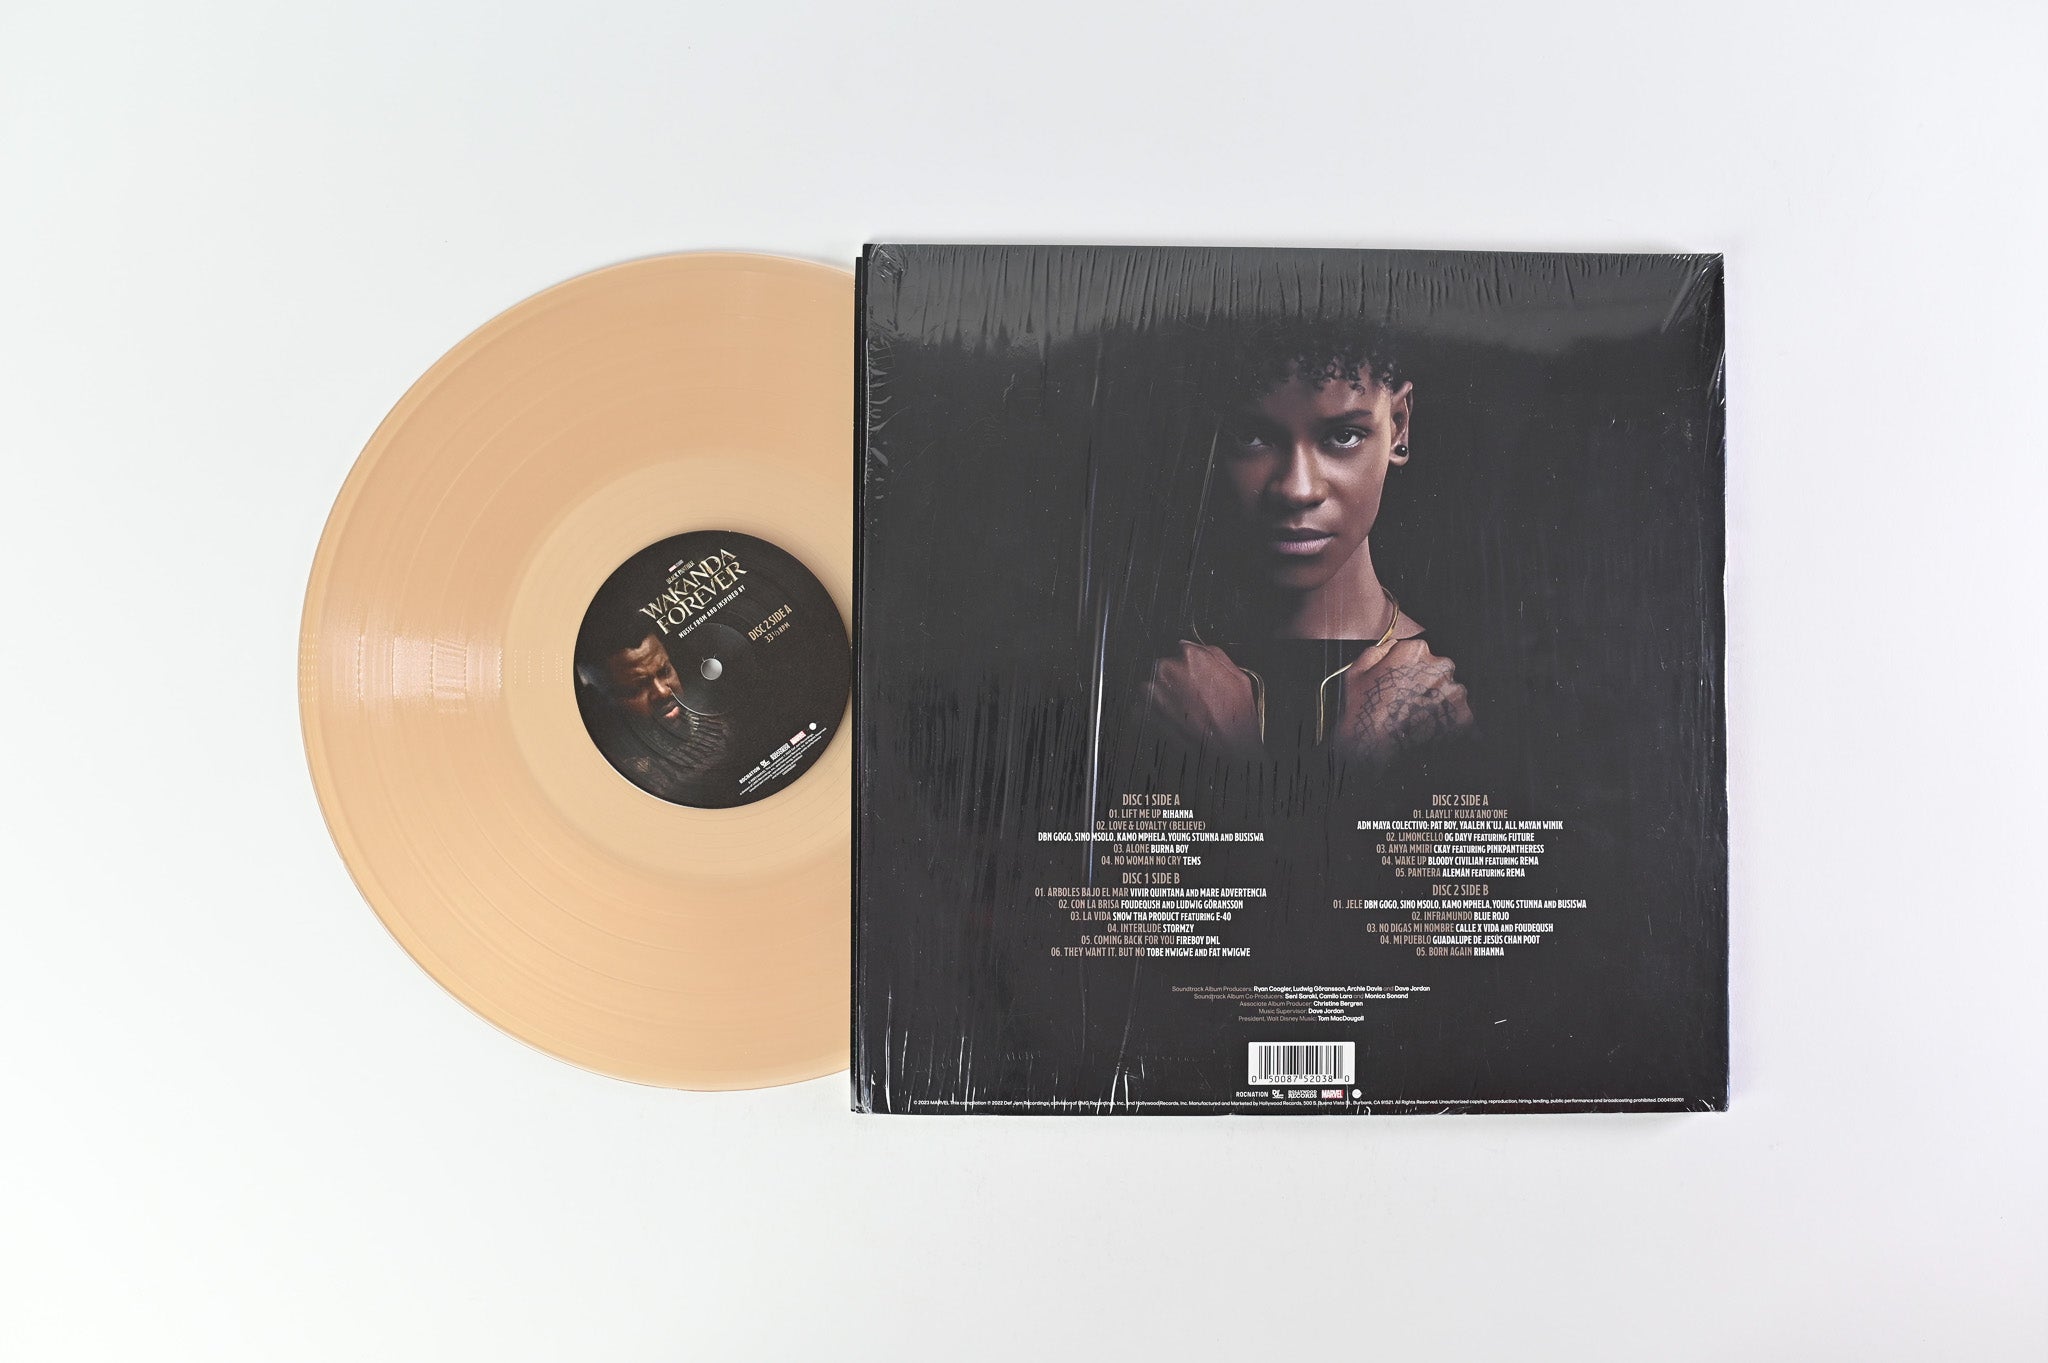 Various - Black Panther: Wakanda Forever - Music From And Inspired By on Hollywood / Roc Nation / Def Jam / Marvel - Tan Translucent Vinyl